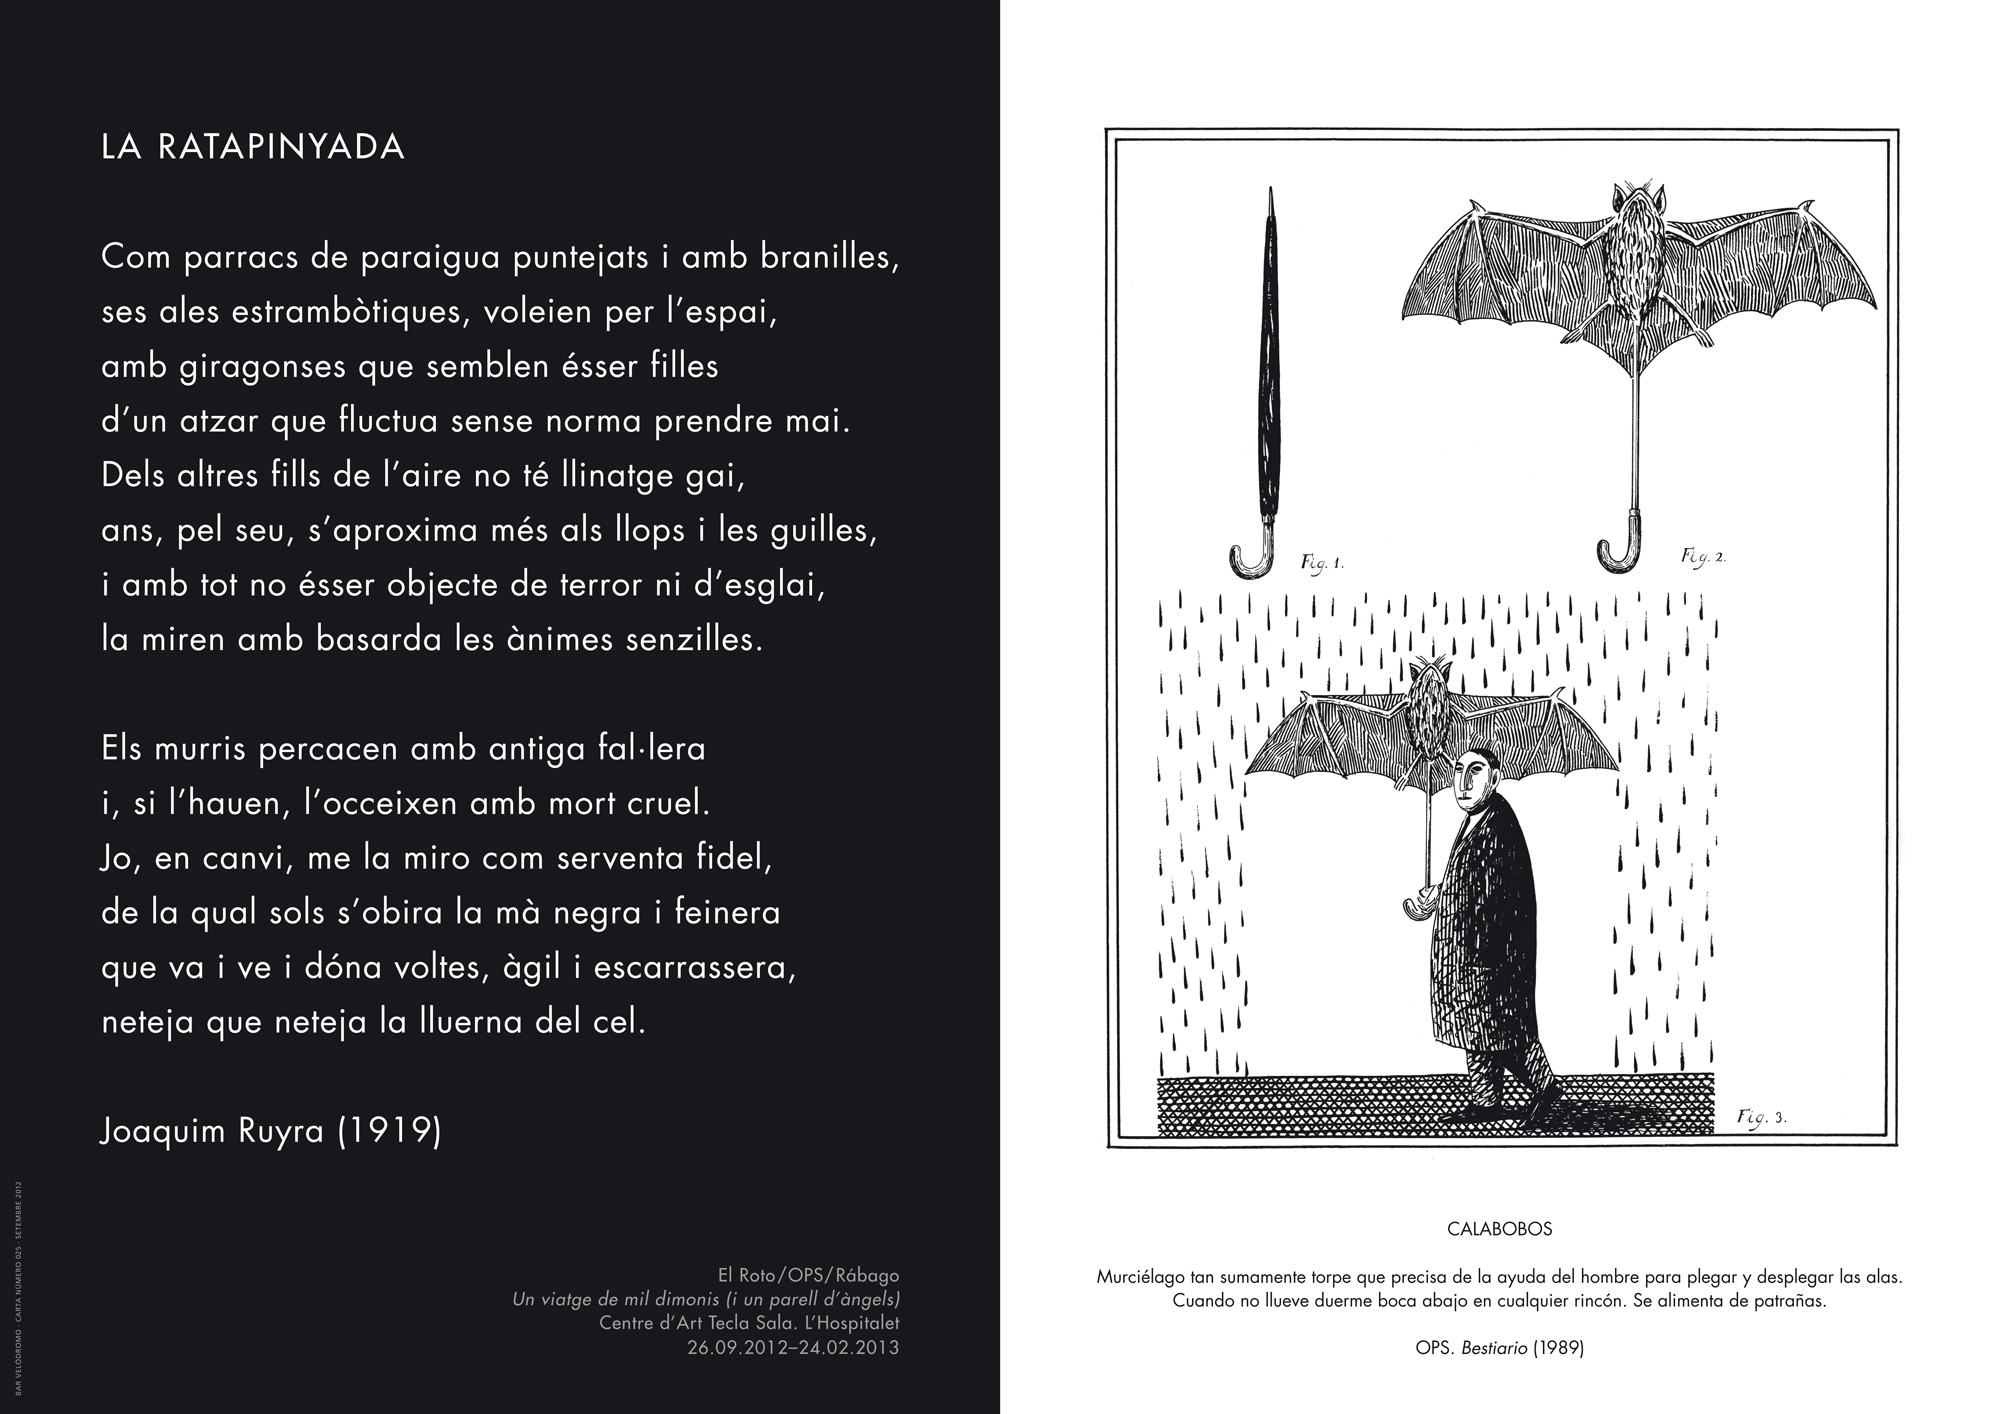 an image of a book cover with black and white illustration of a man under an umbrella